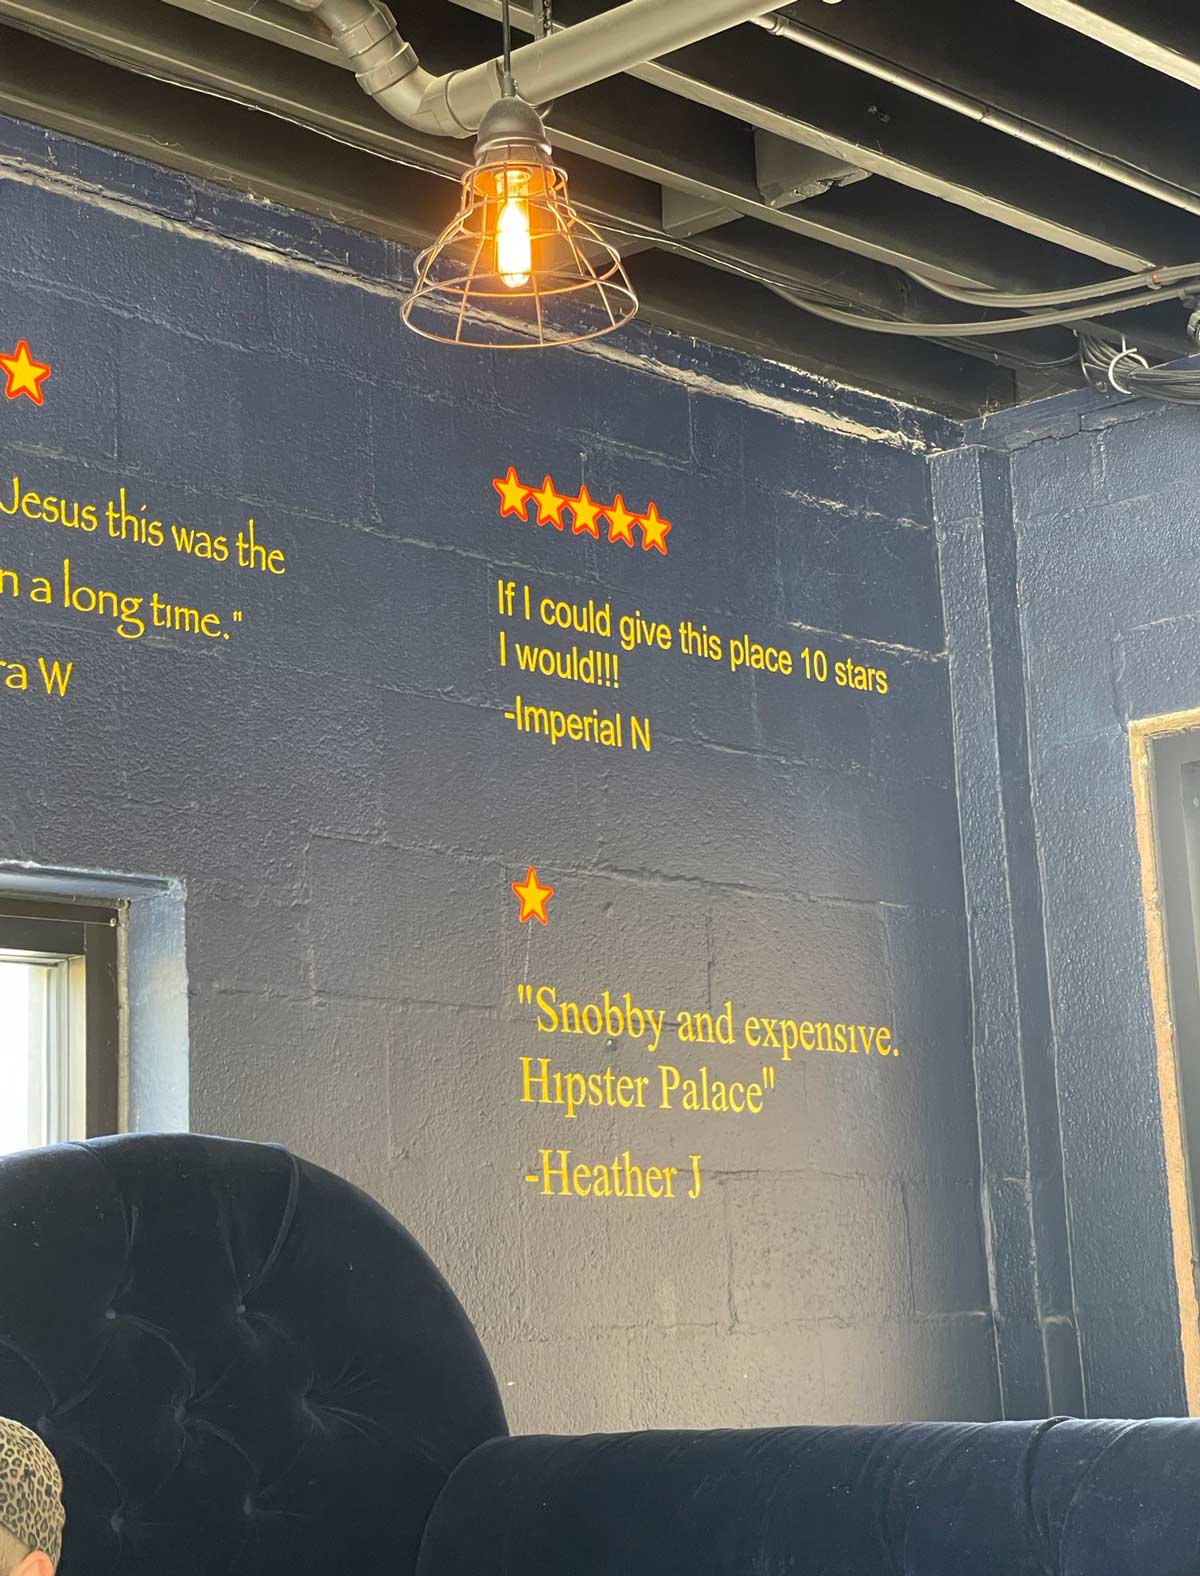 Restaurant my friend went to had several reviews painted on the wall. The bottom one was best